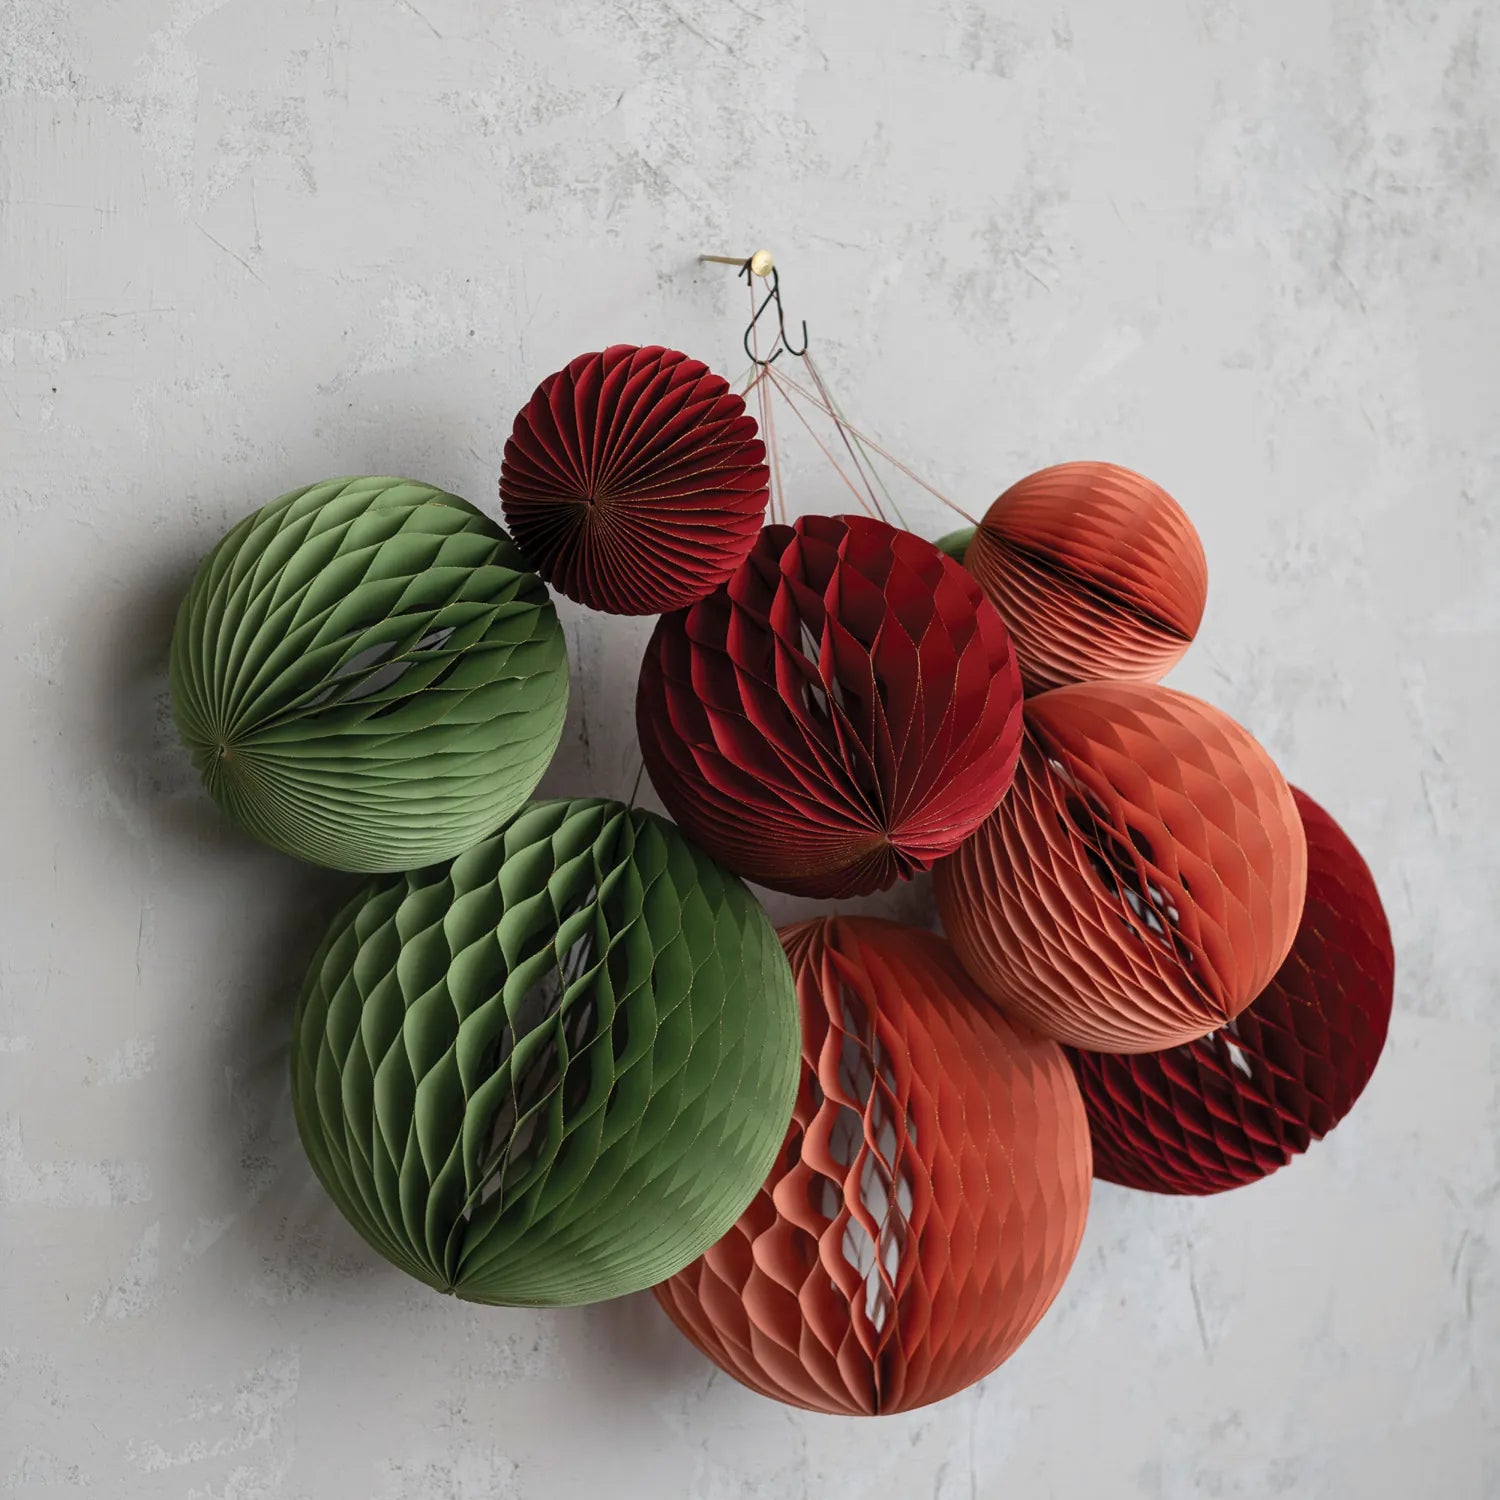 Handmade recycled paper ornaments in red, green and pink with gold edges are hung together agaist a wall.